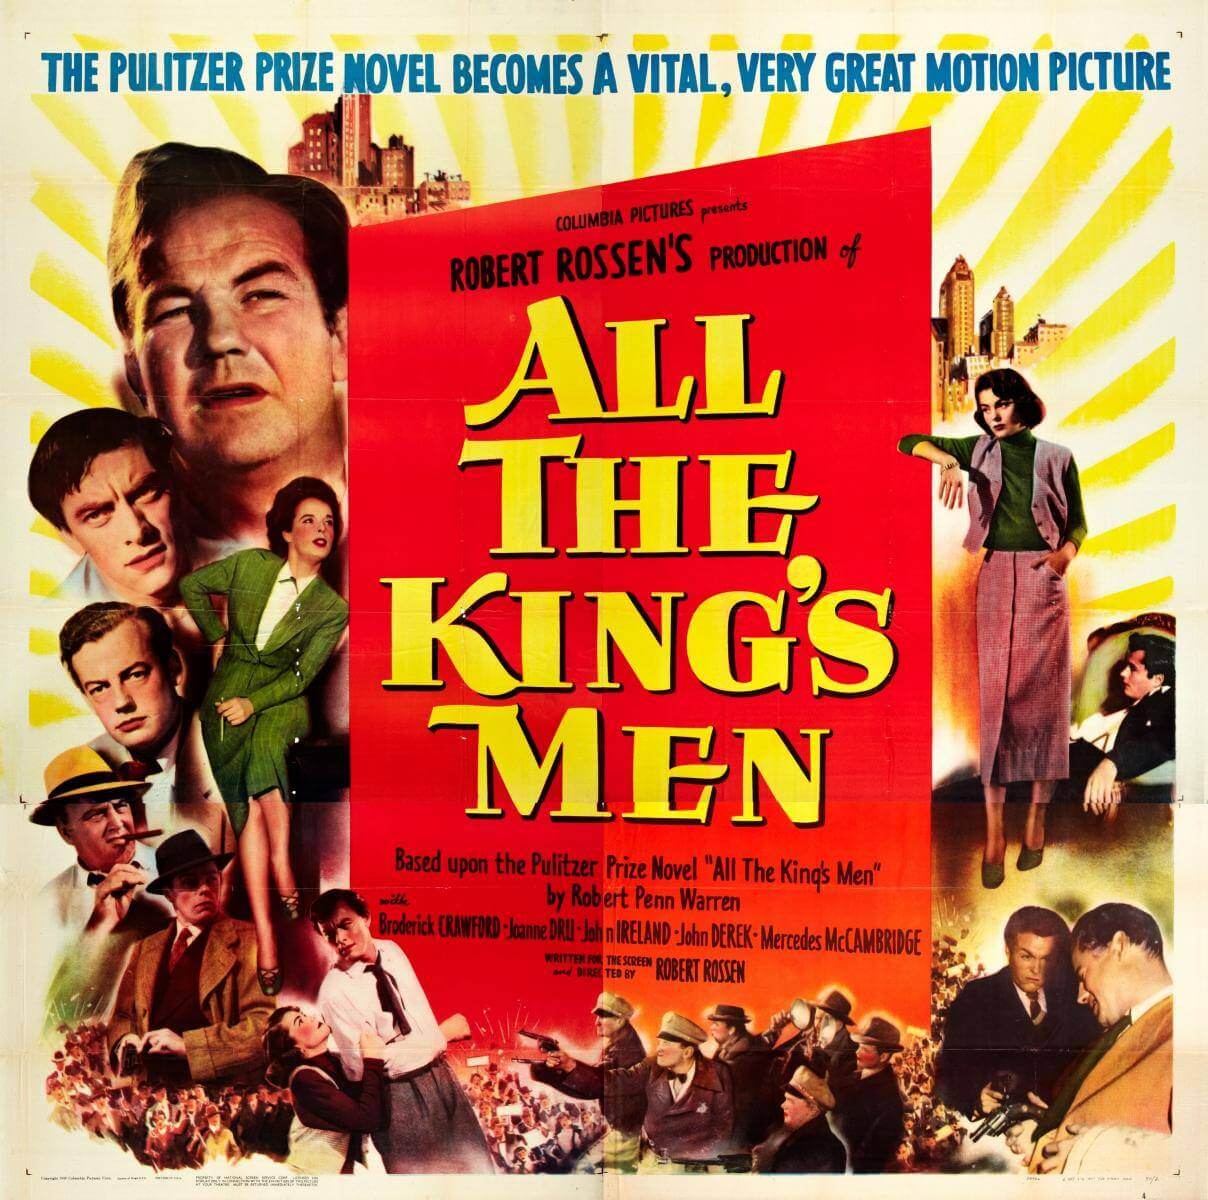 Back in the Day: ‘All the King’s Men’ the king of movies, filmed in Fairfield/Suisun